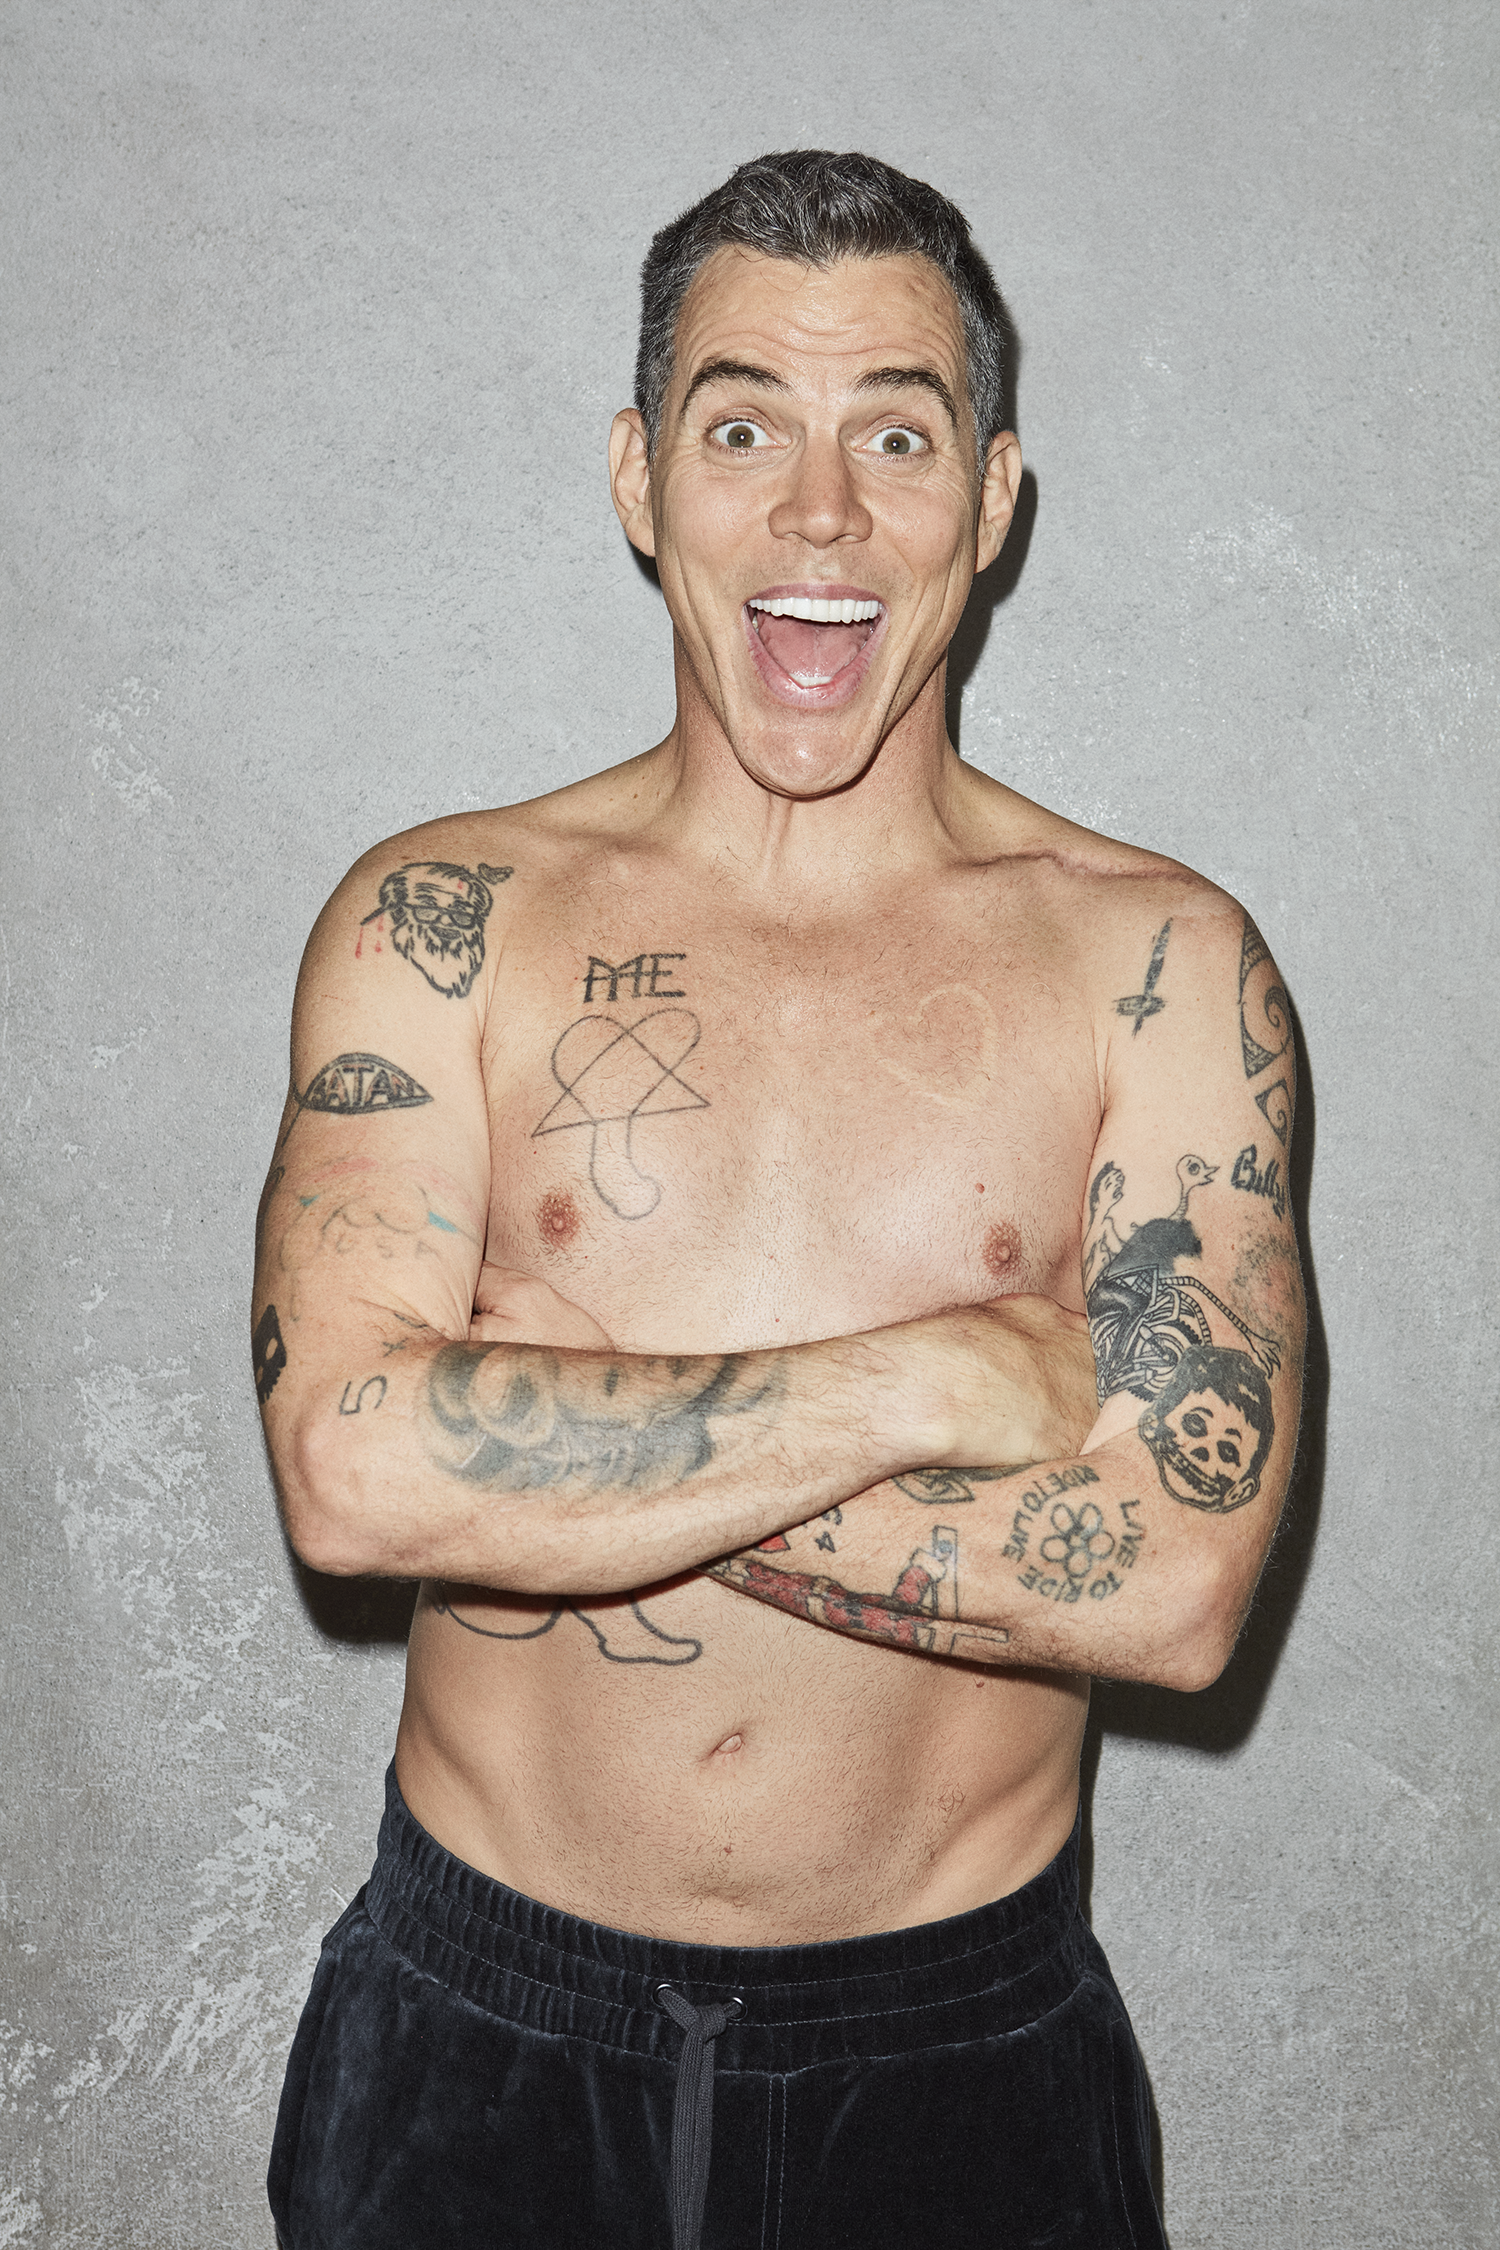 Aggregate 67 johnny knoxville tattoo super hot  thtantai2